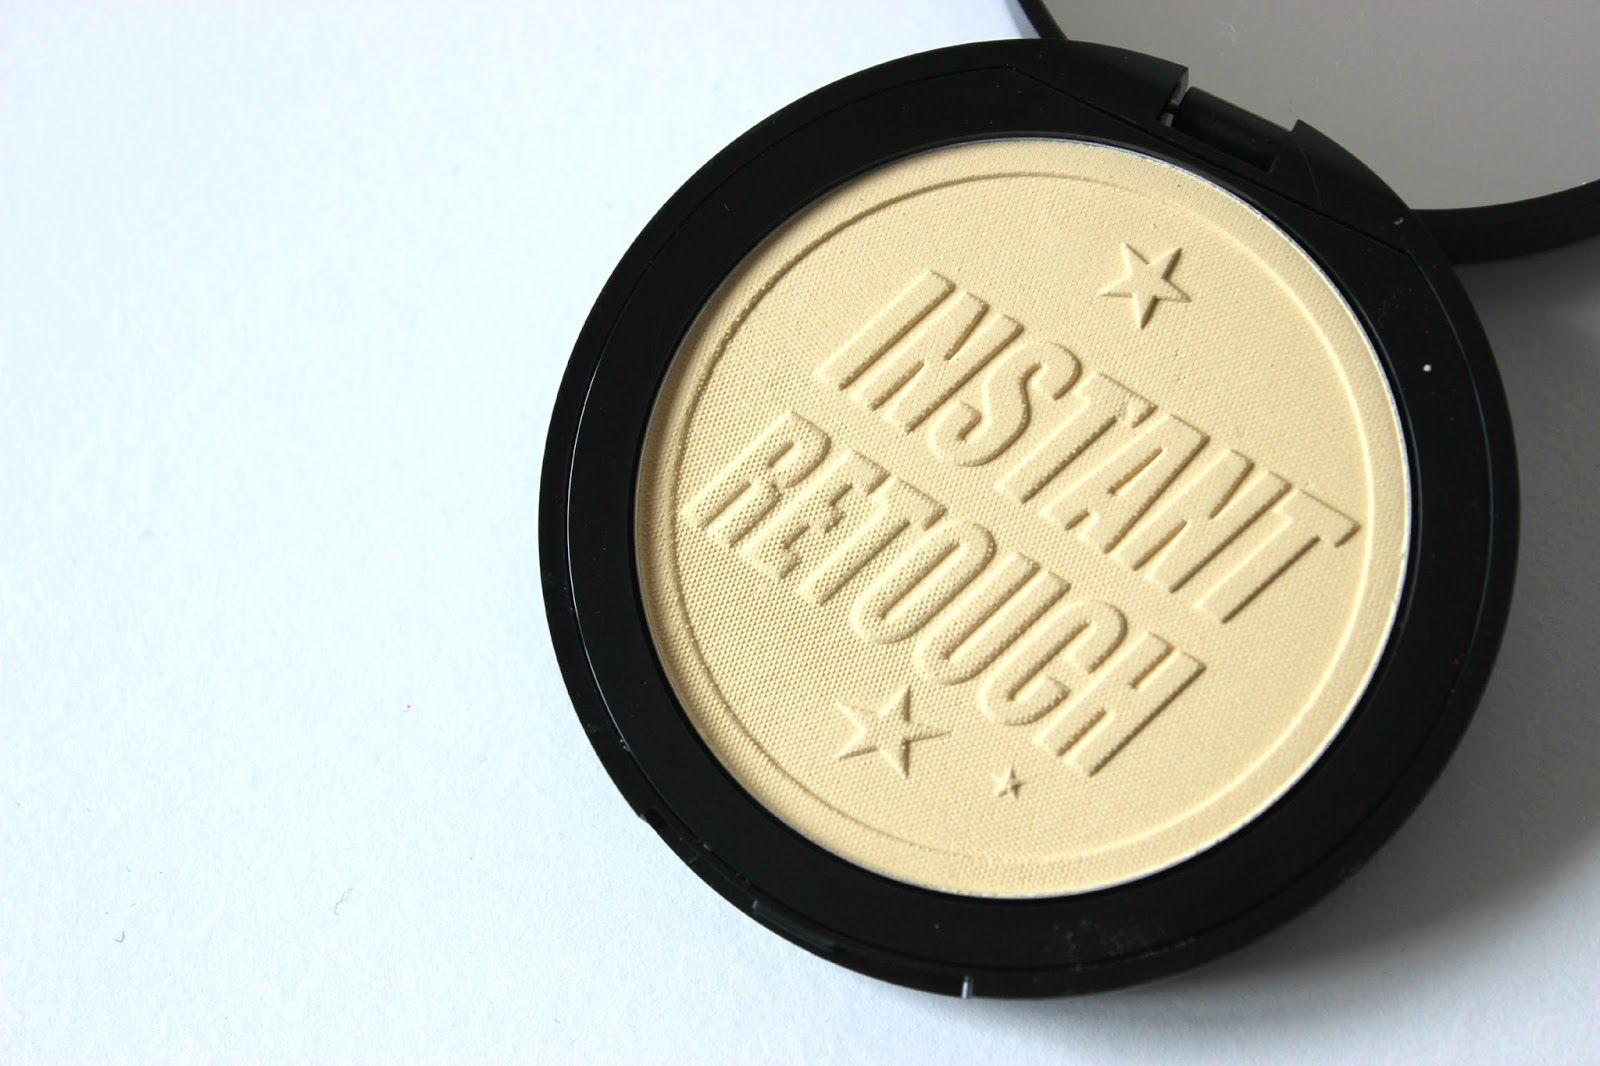 A picture of Soap & Glory Kick Ass Instant Retouch Pressed Powder